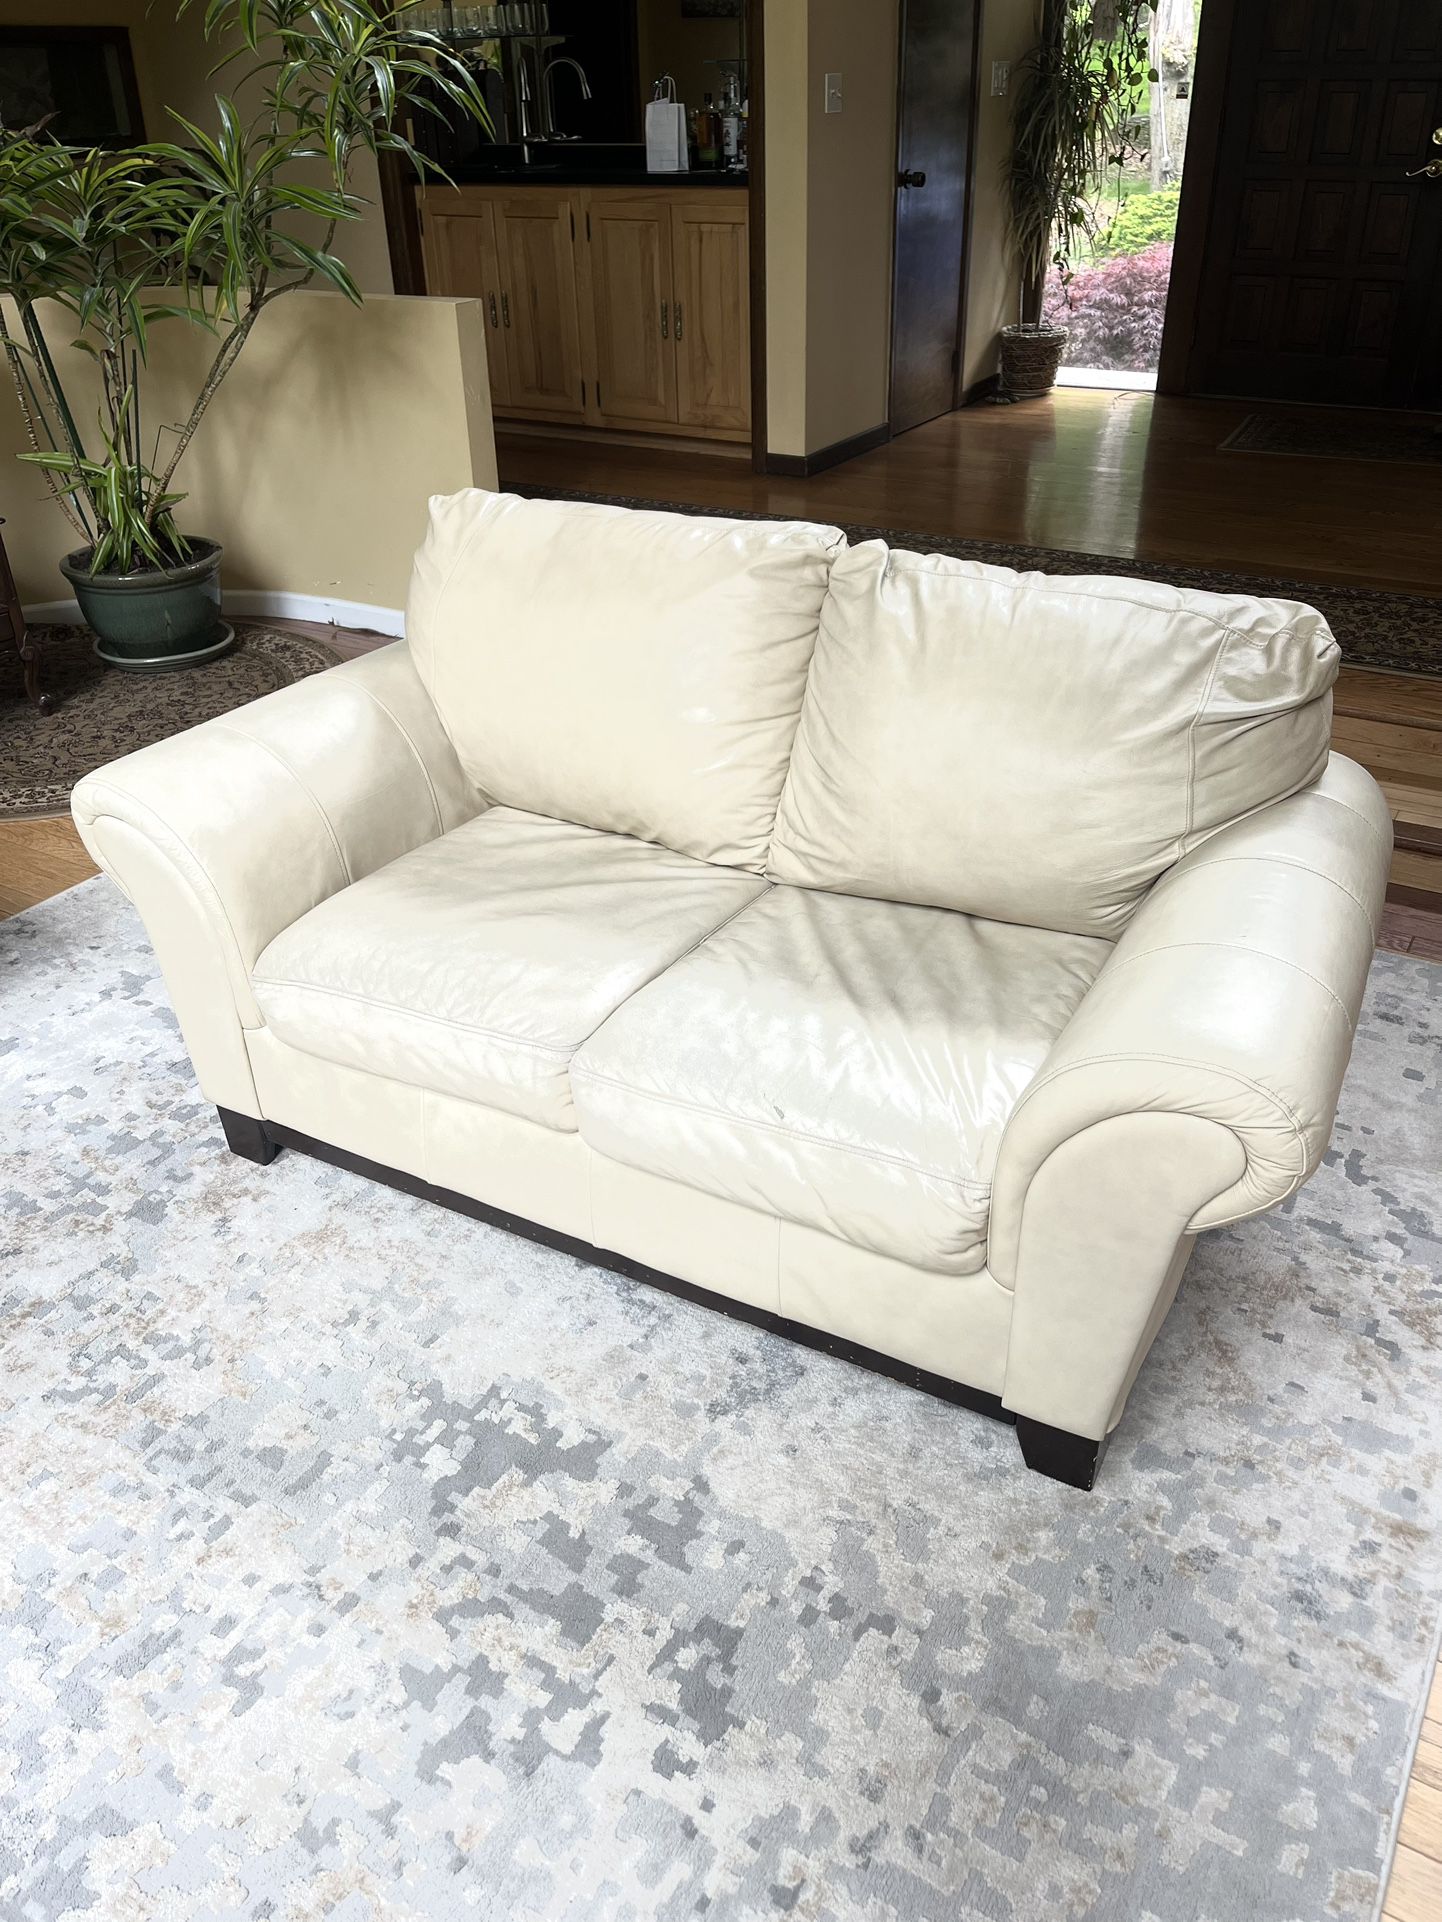 White Leather Couch (FREE DELIVERY) 🚚